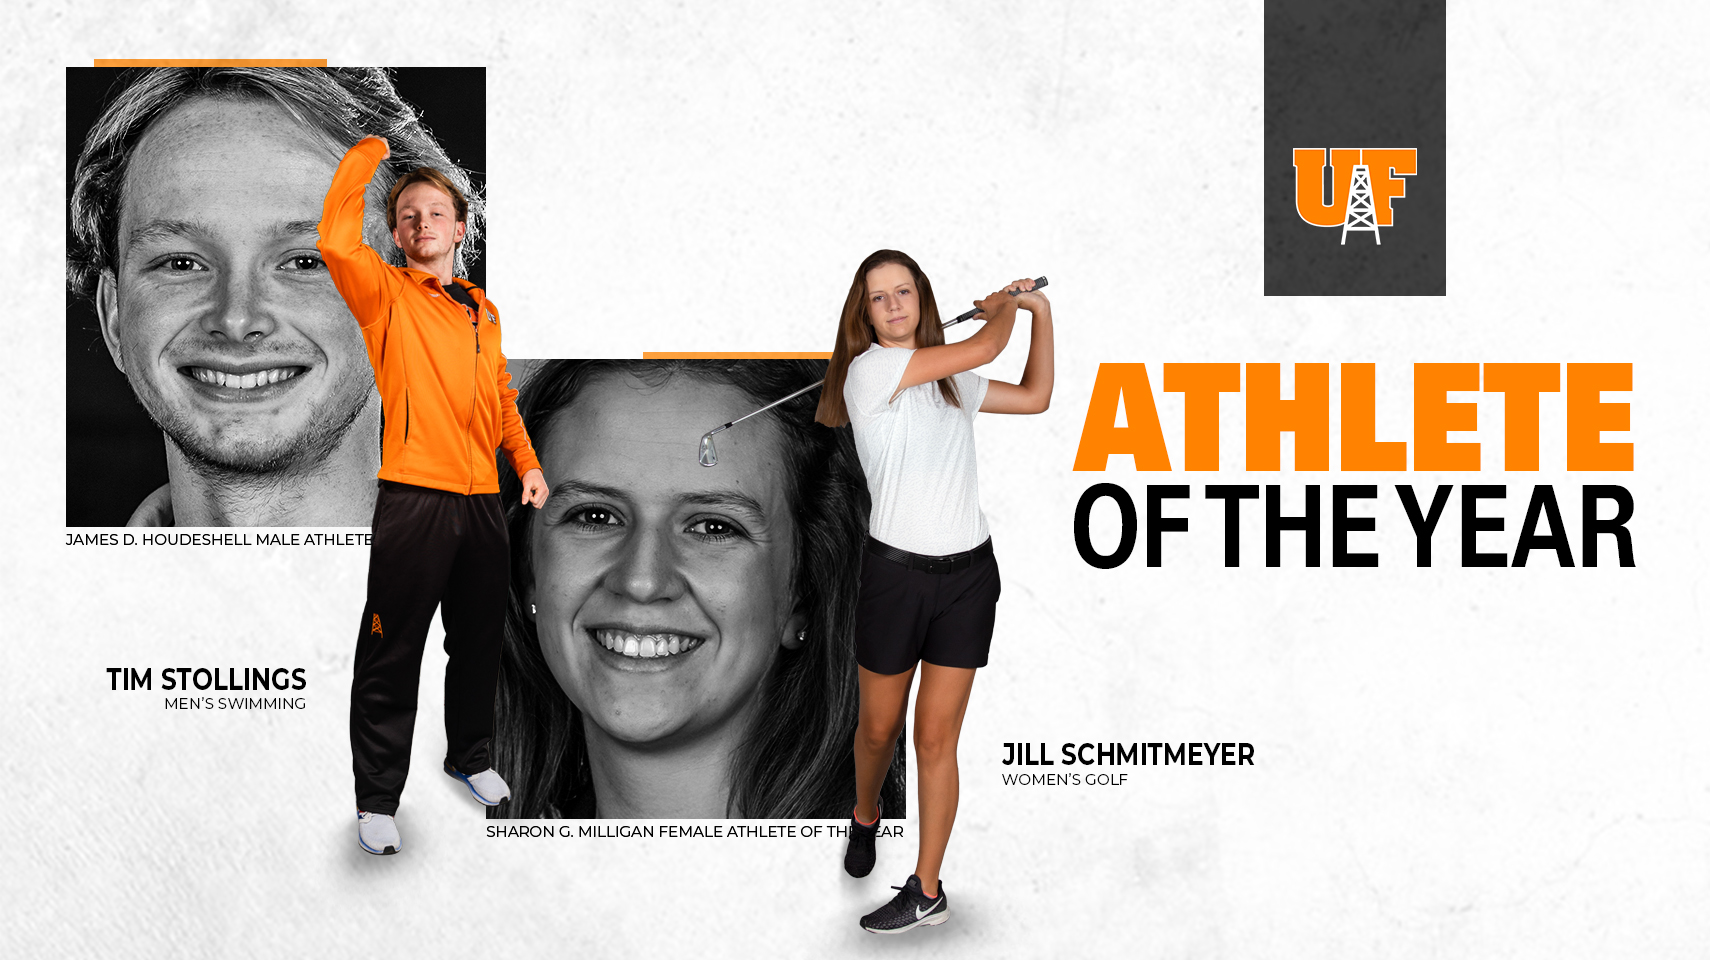 2020-21 University of Findlay Athletes of the Year. Tim Stollings (Swimming) and Jill Schmitmeyer (Women's Golf)